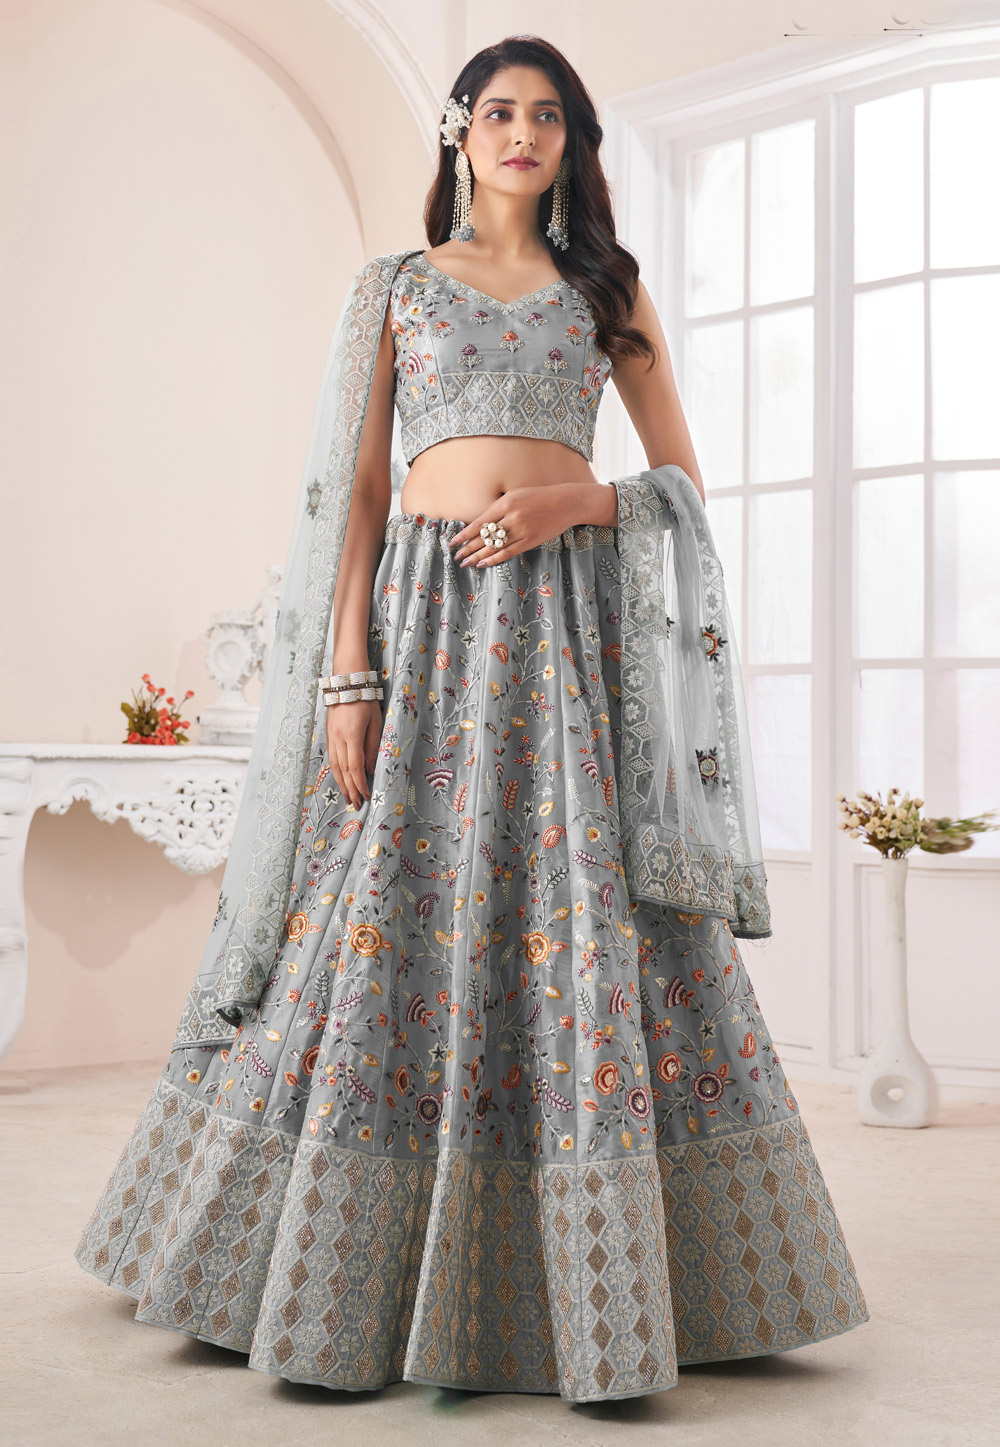 Buy Indian Black And Grey Wedding Lehenga Suit for Women Online in USA, UK,  Canada, Australia, Germany, New Zealand and Worldwide at Best Price